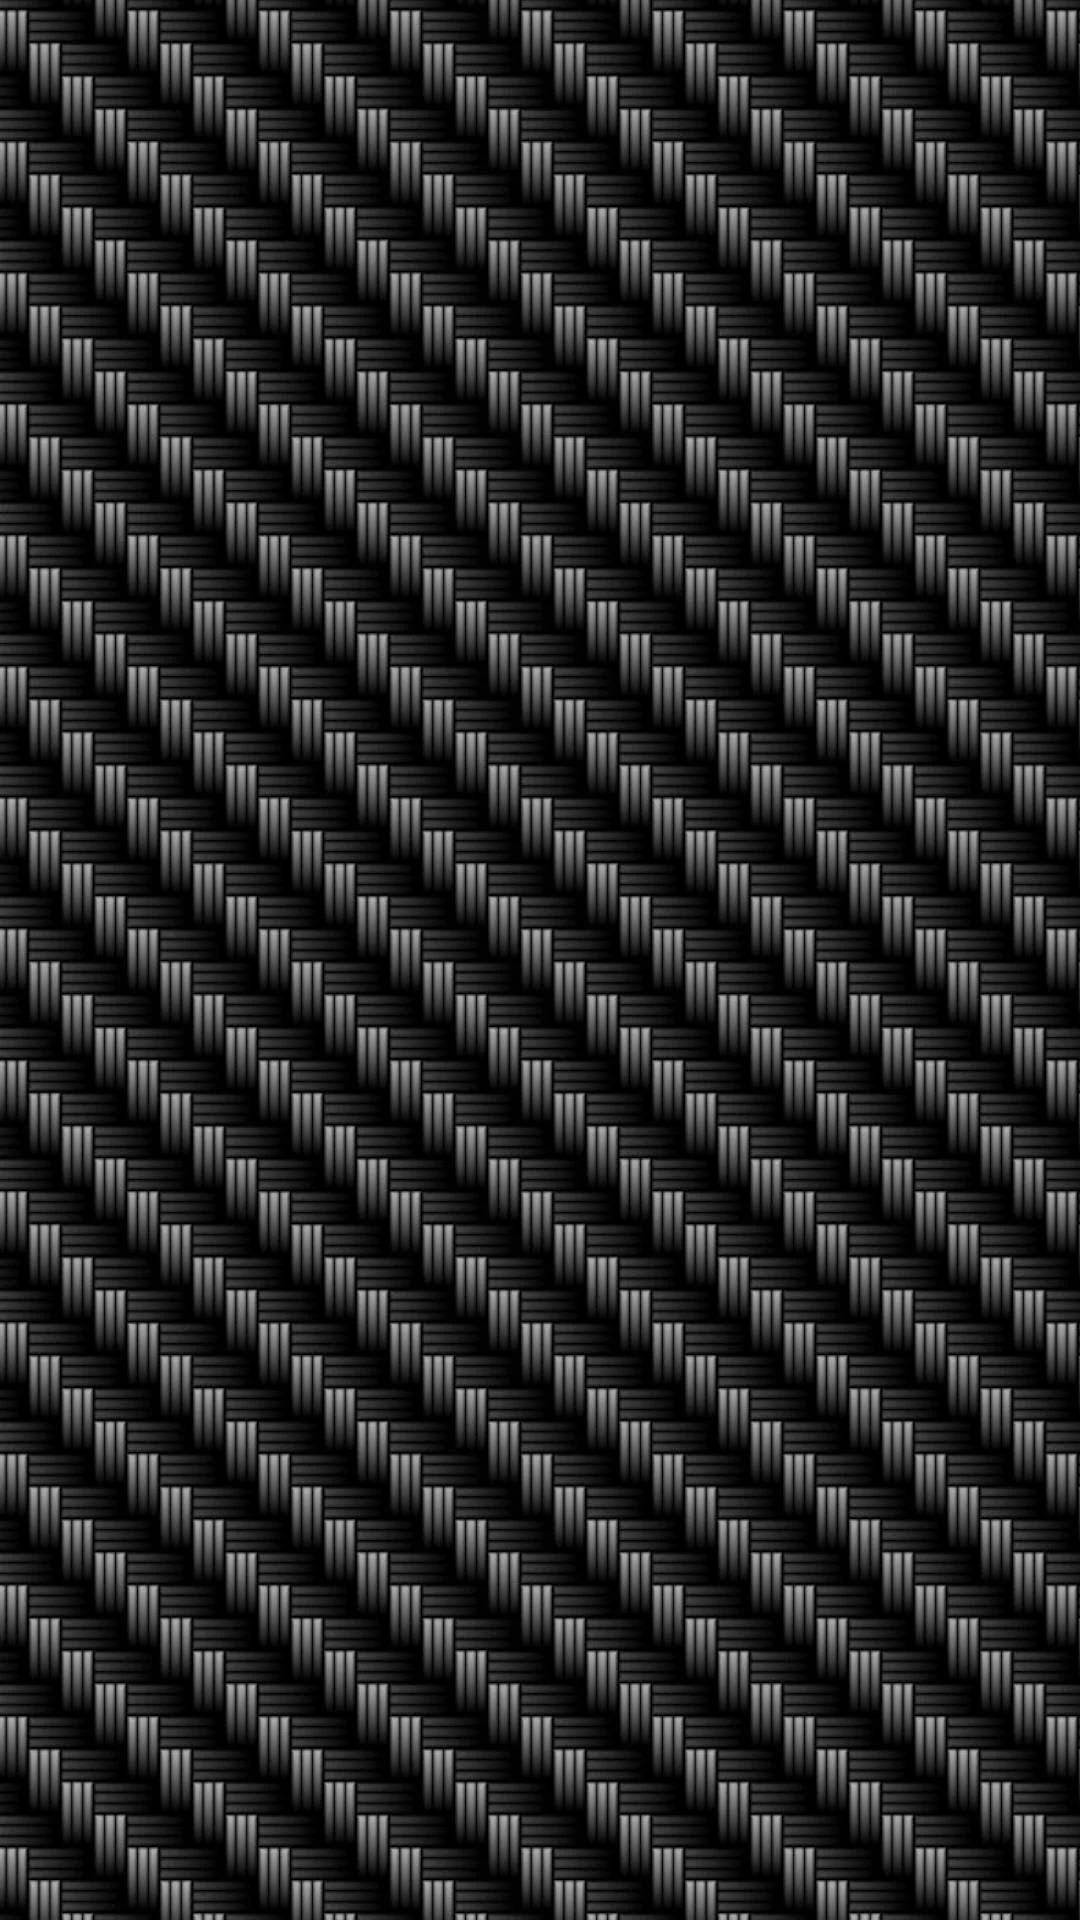 Carbon Fiber Fabric In 4k Background